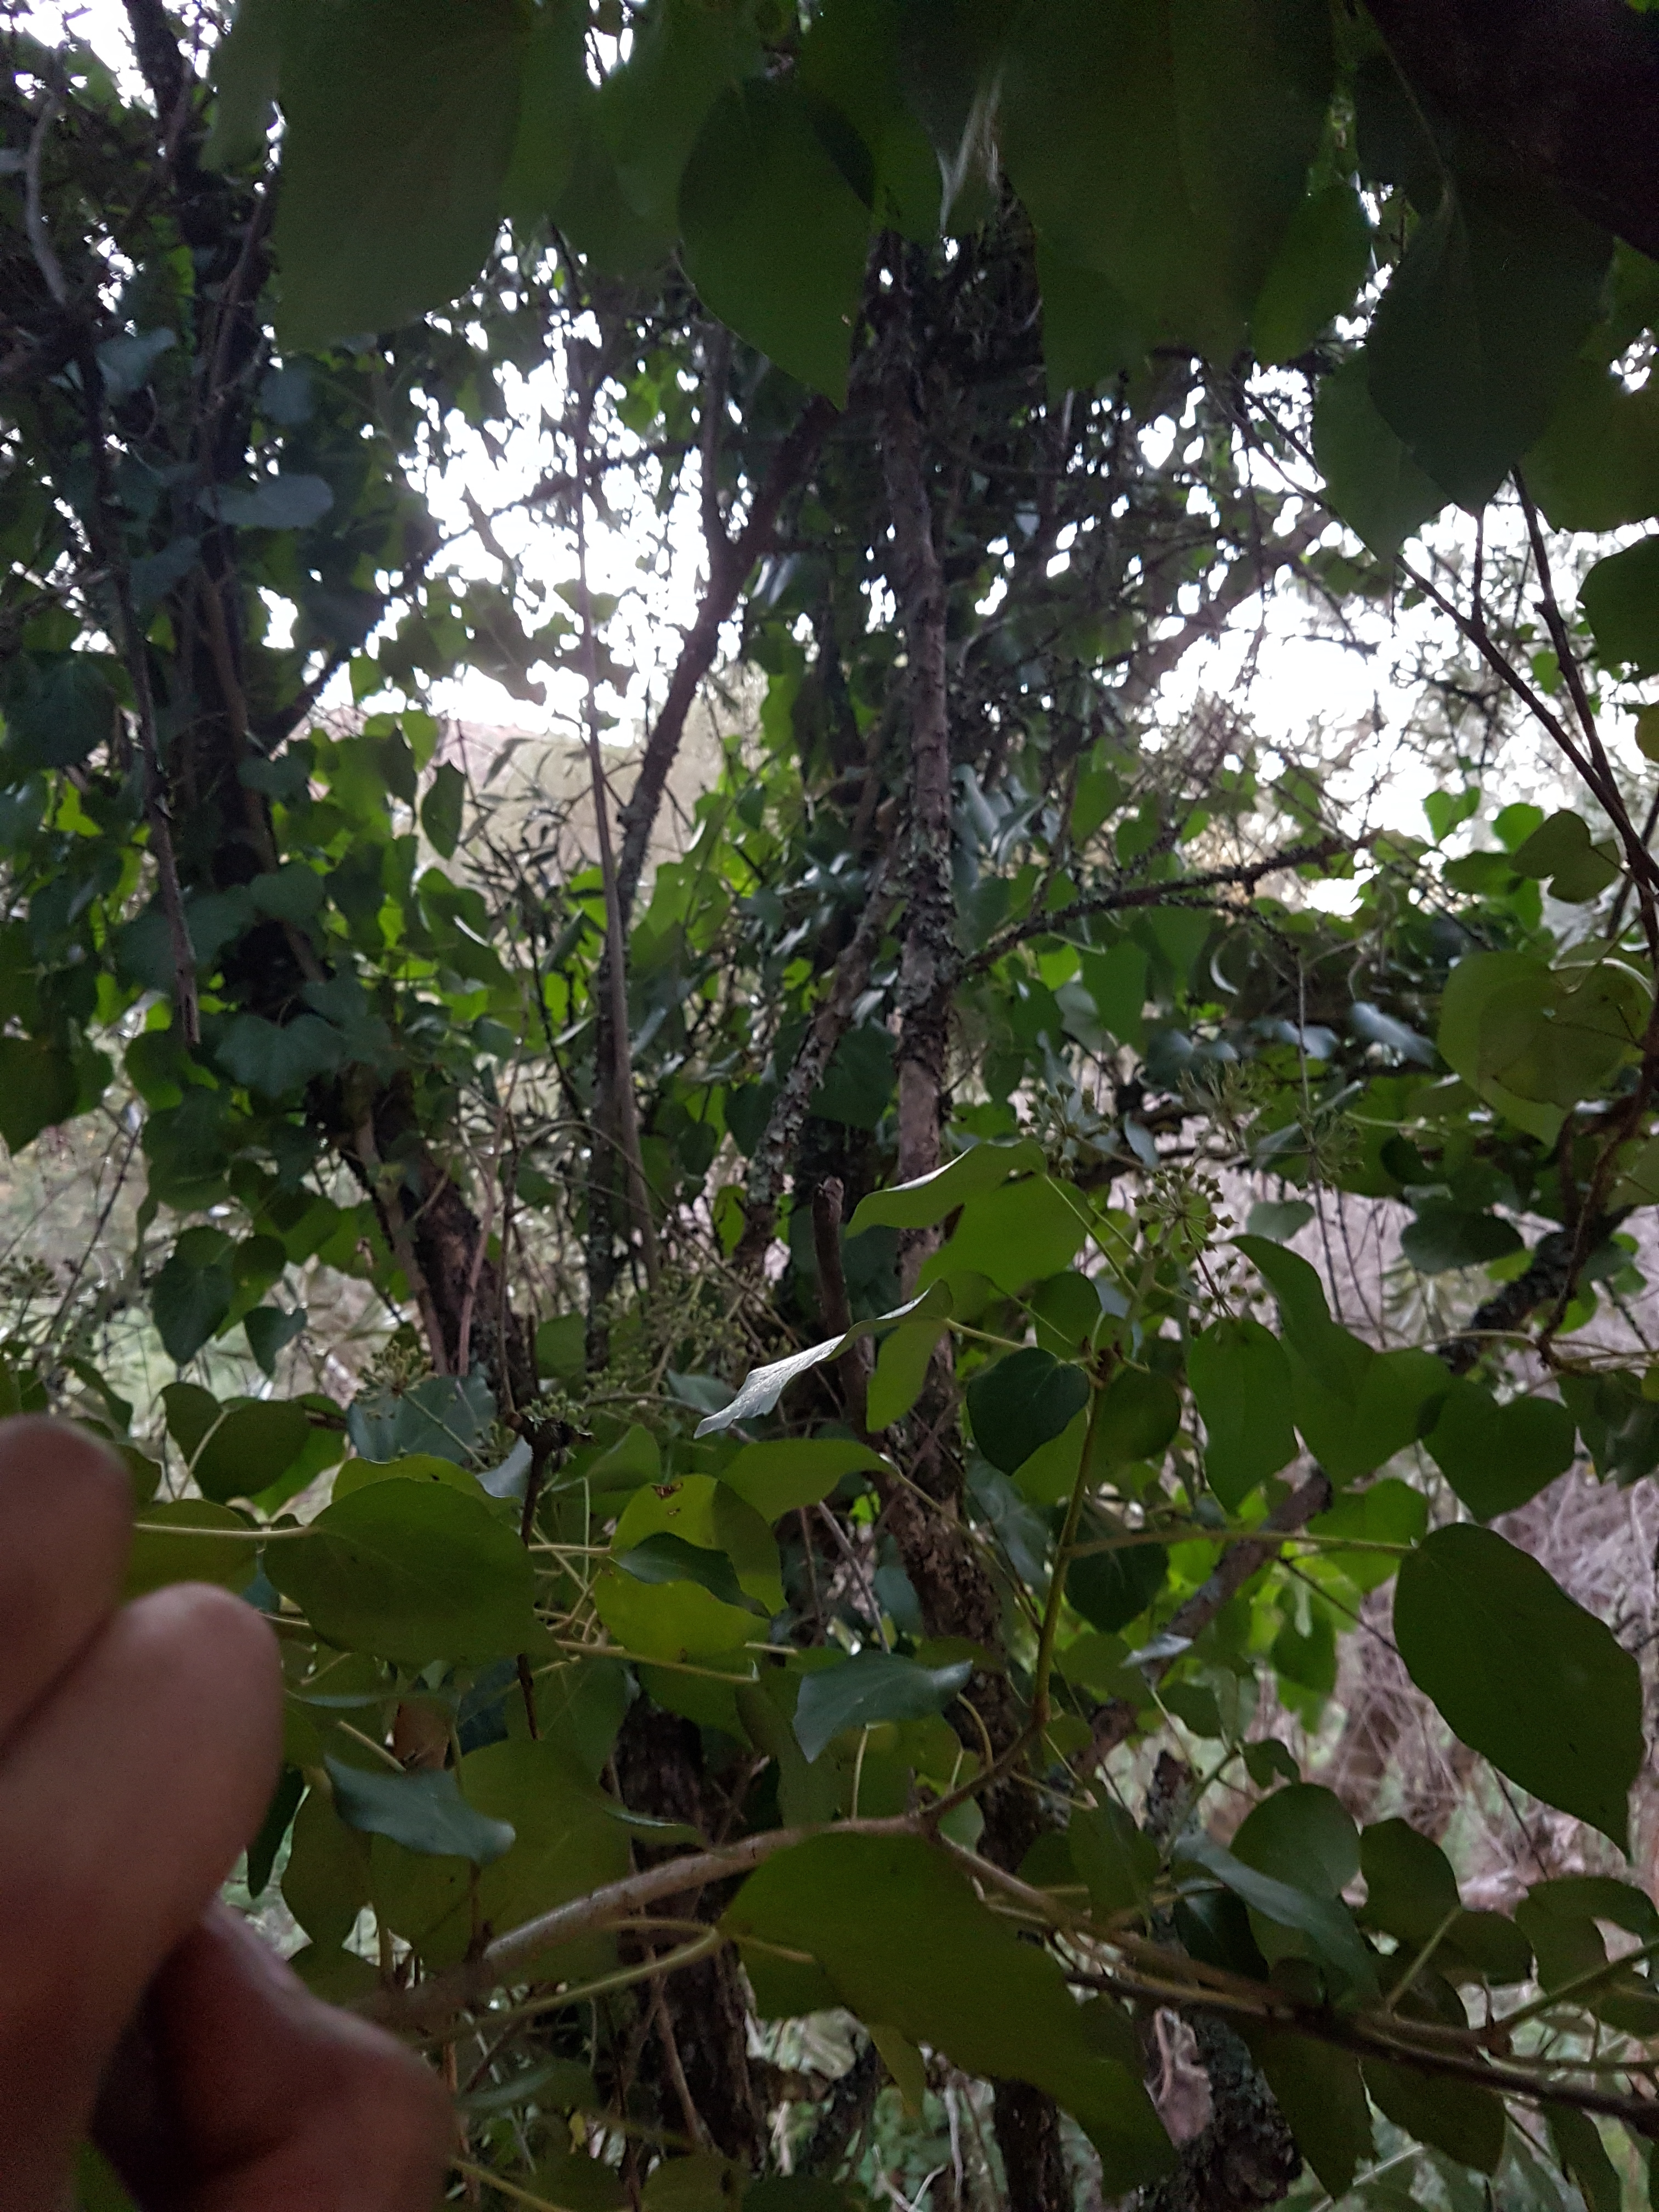 I’m in the olive tree, looking for olive leaves. It will take us many hours of cutting and pulling to bring them back into view.